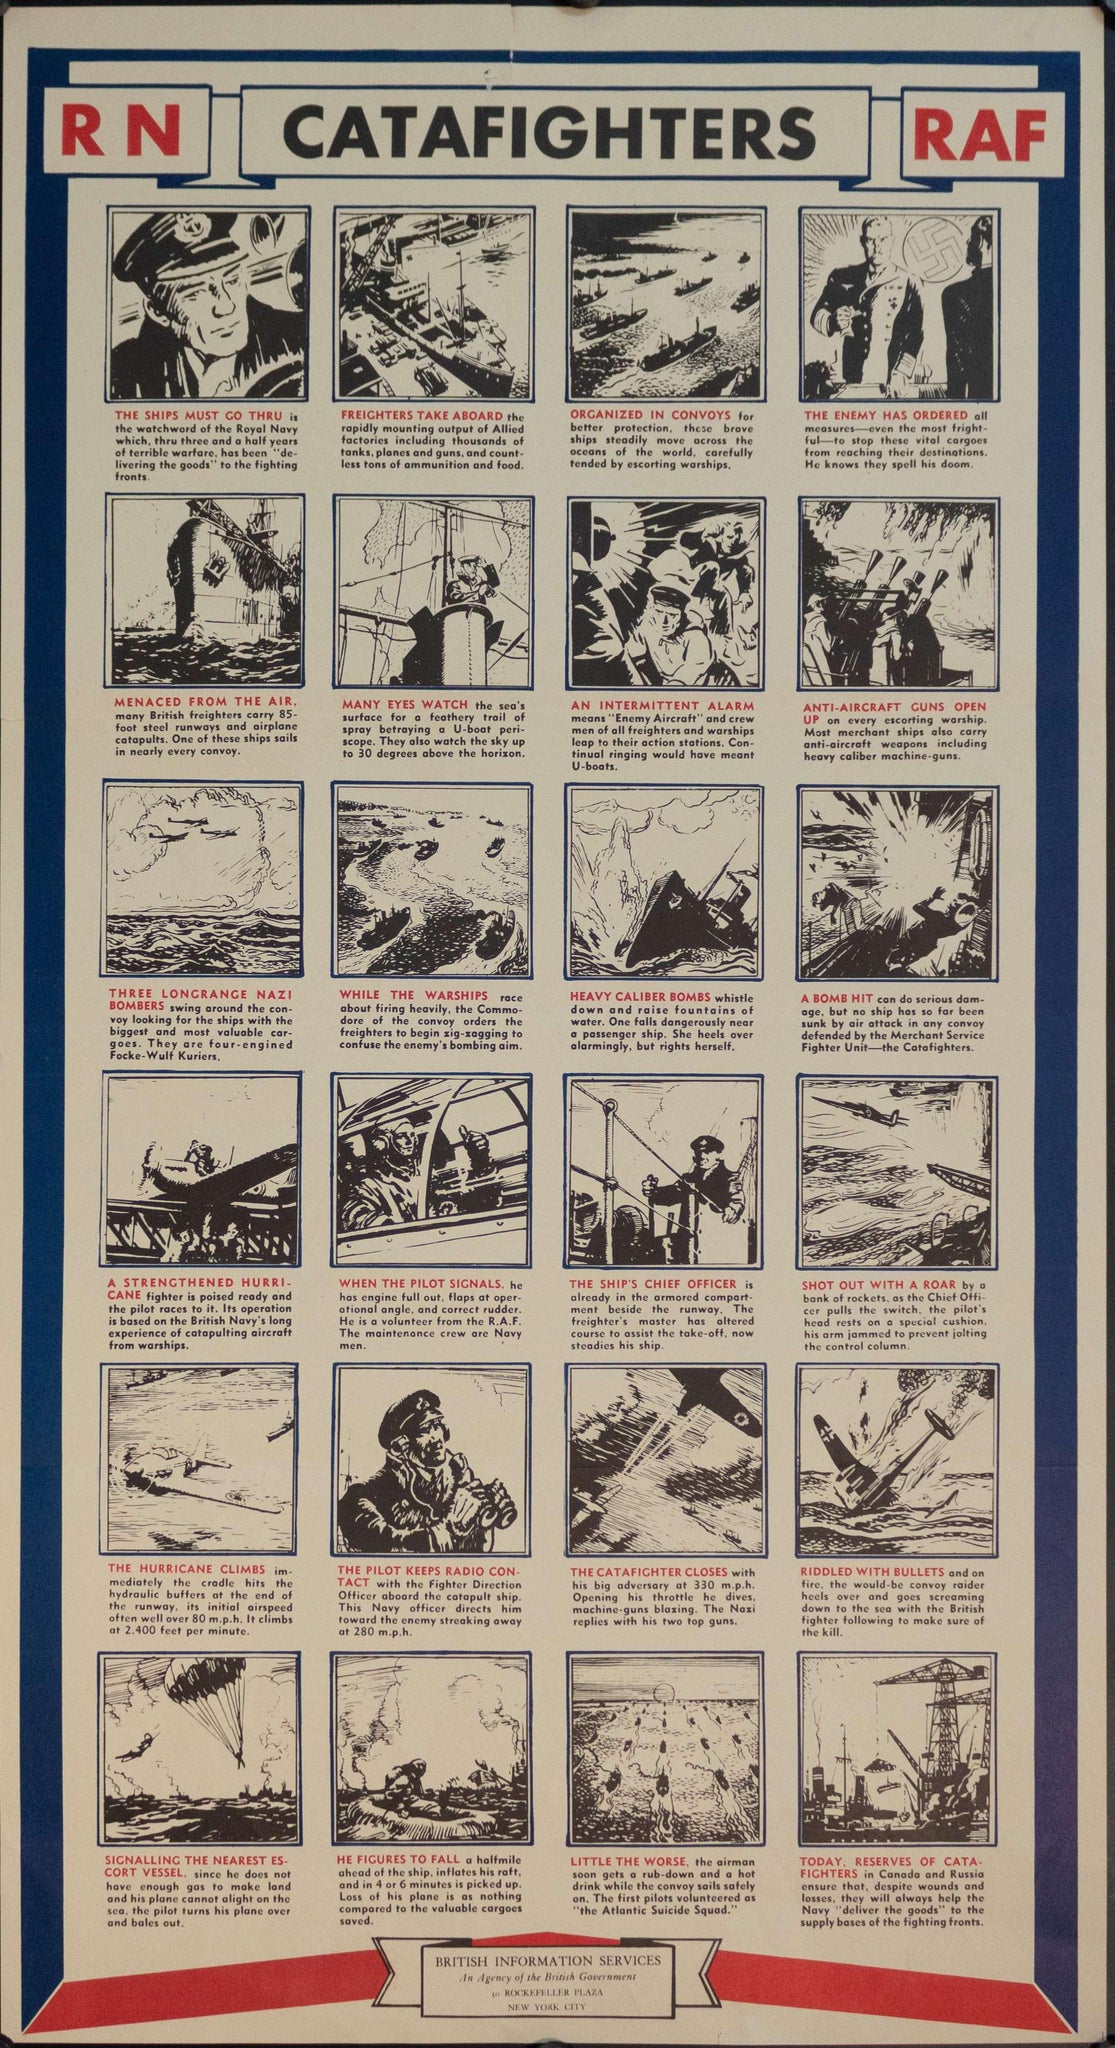 c. 1940s RN Catafighters RAF - Golden Age Posters